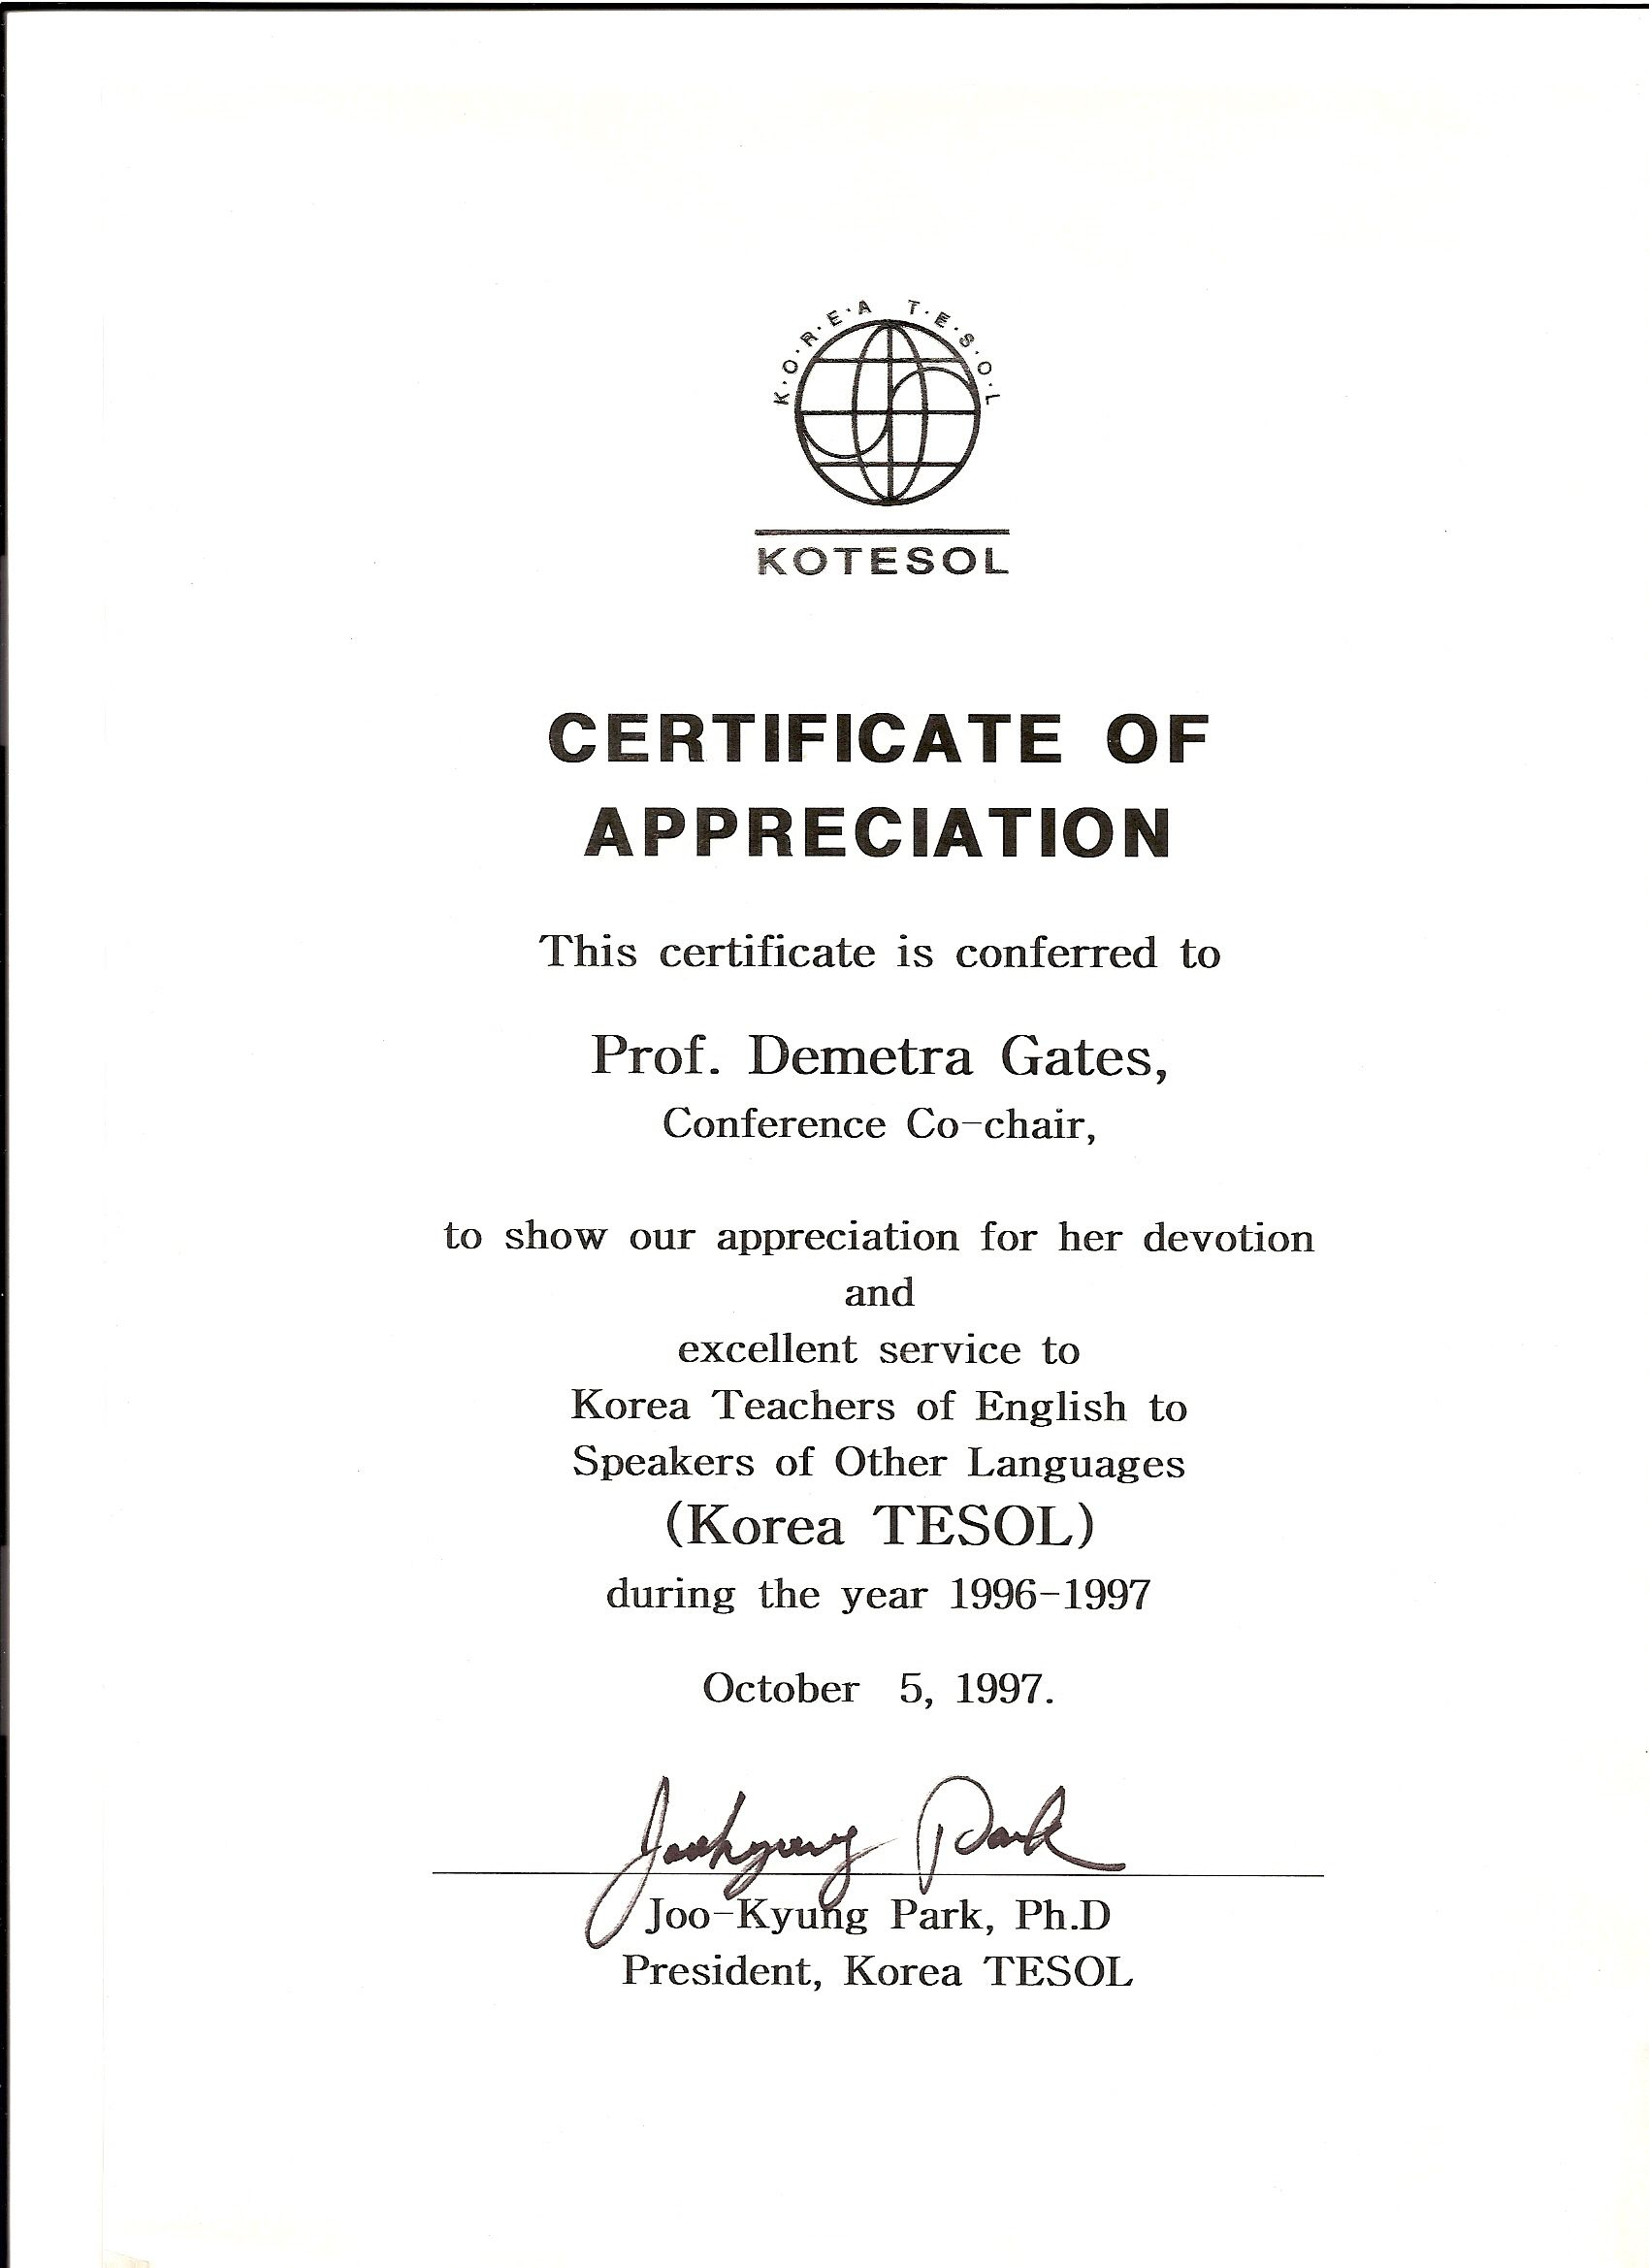 Kotesol Presidential Certificate Of Appreciation (1997 For With Regard To Certificate Of Achievement Army Template